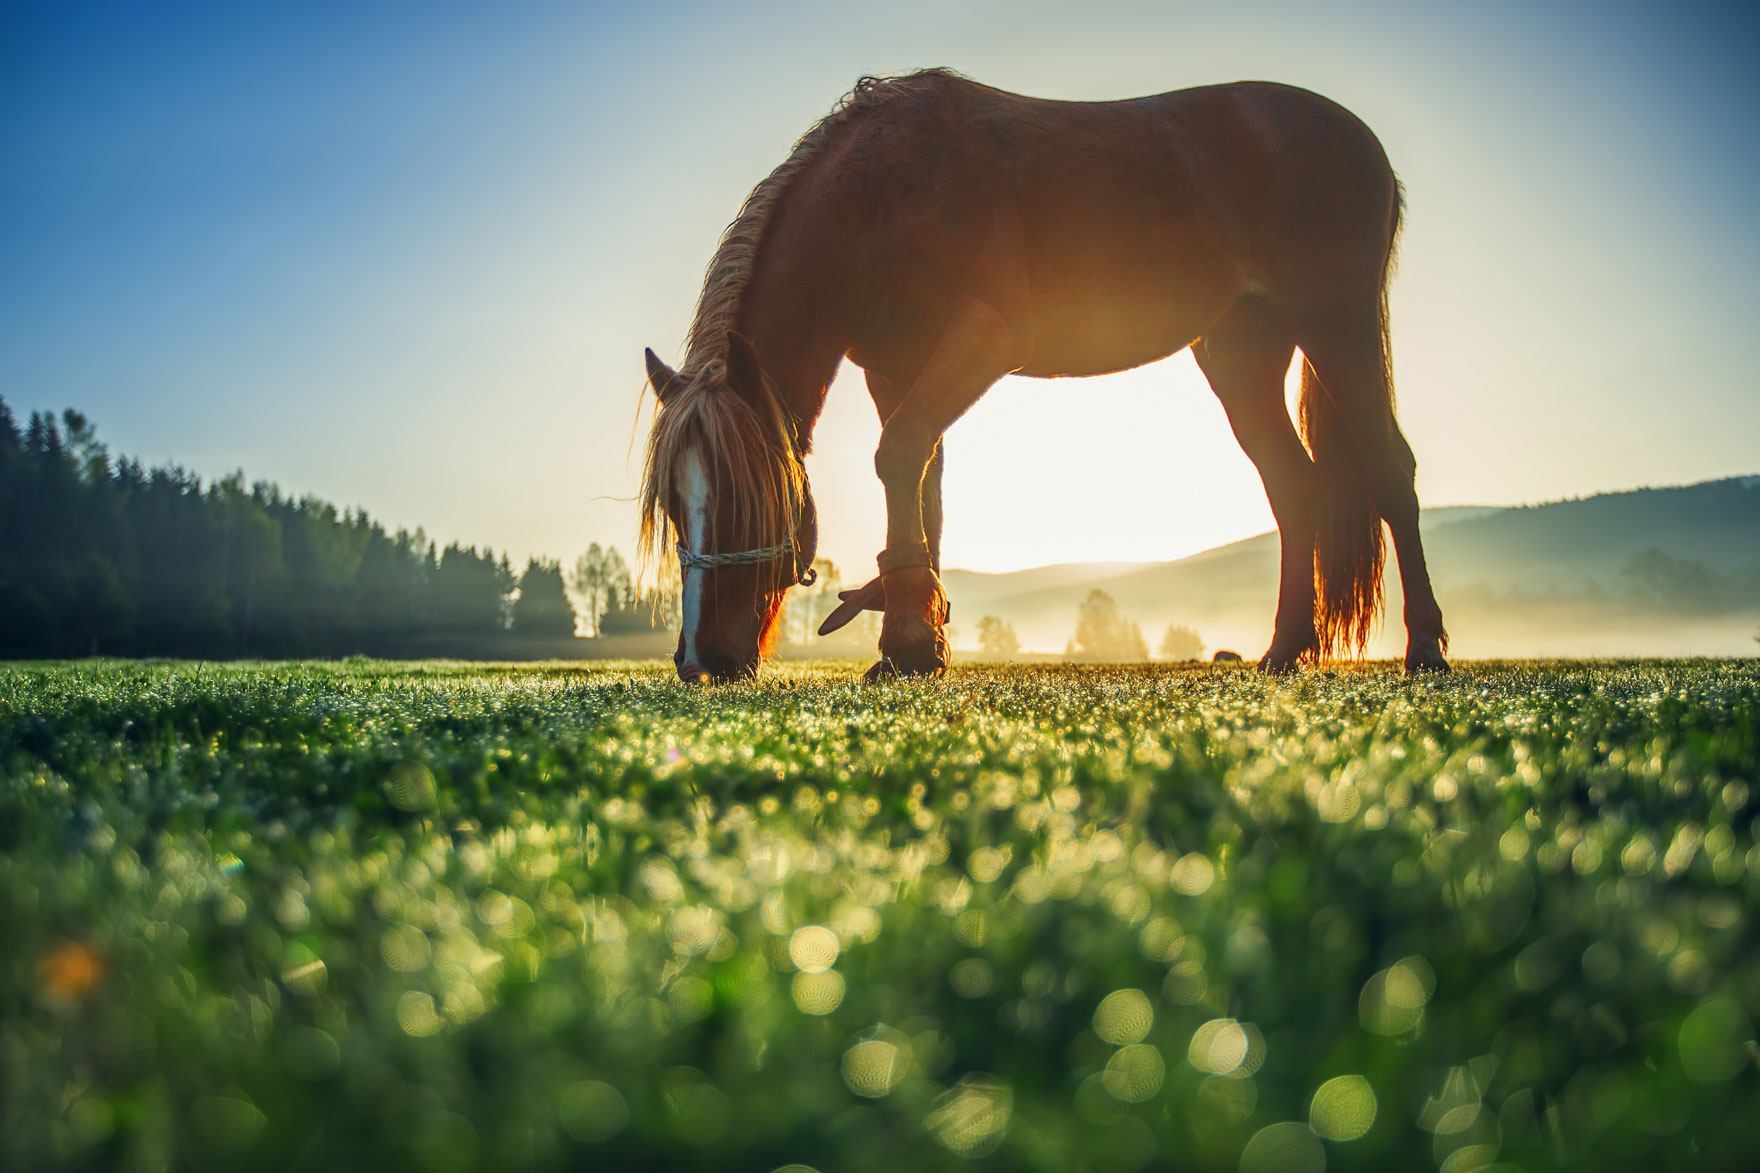 Horse grazing in a pasture at sunset